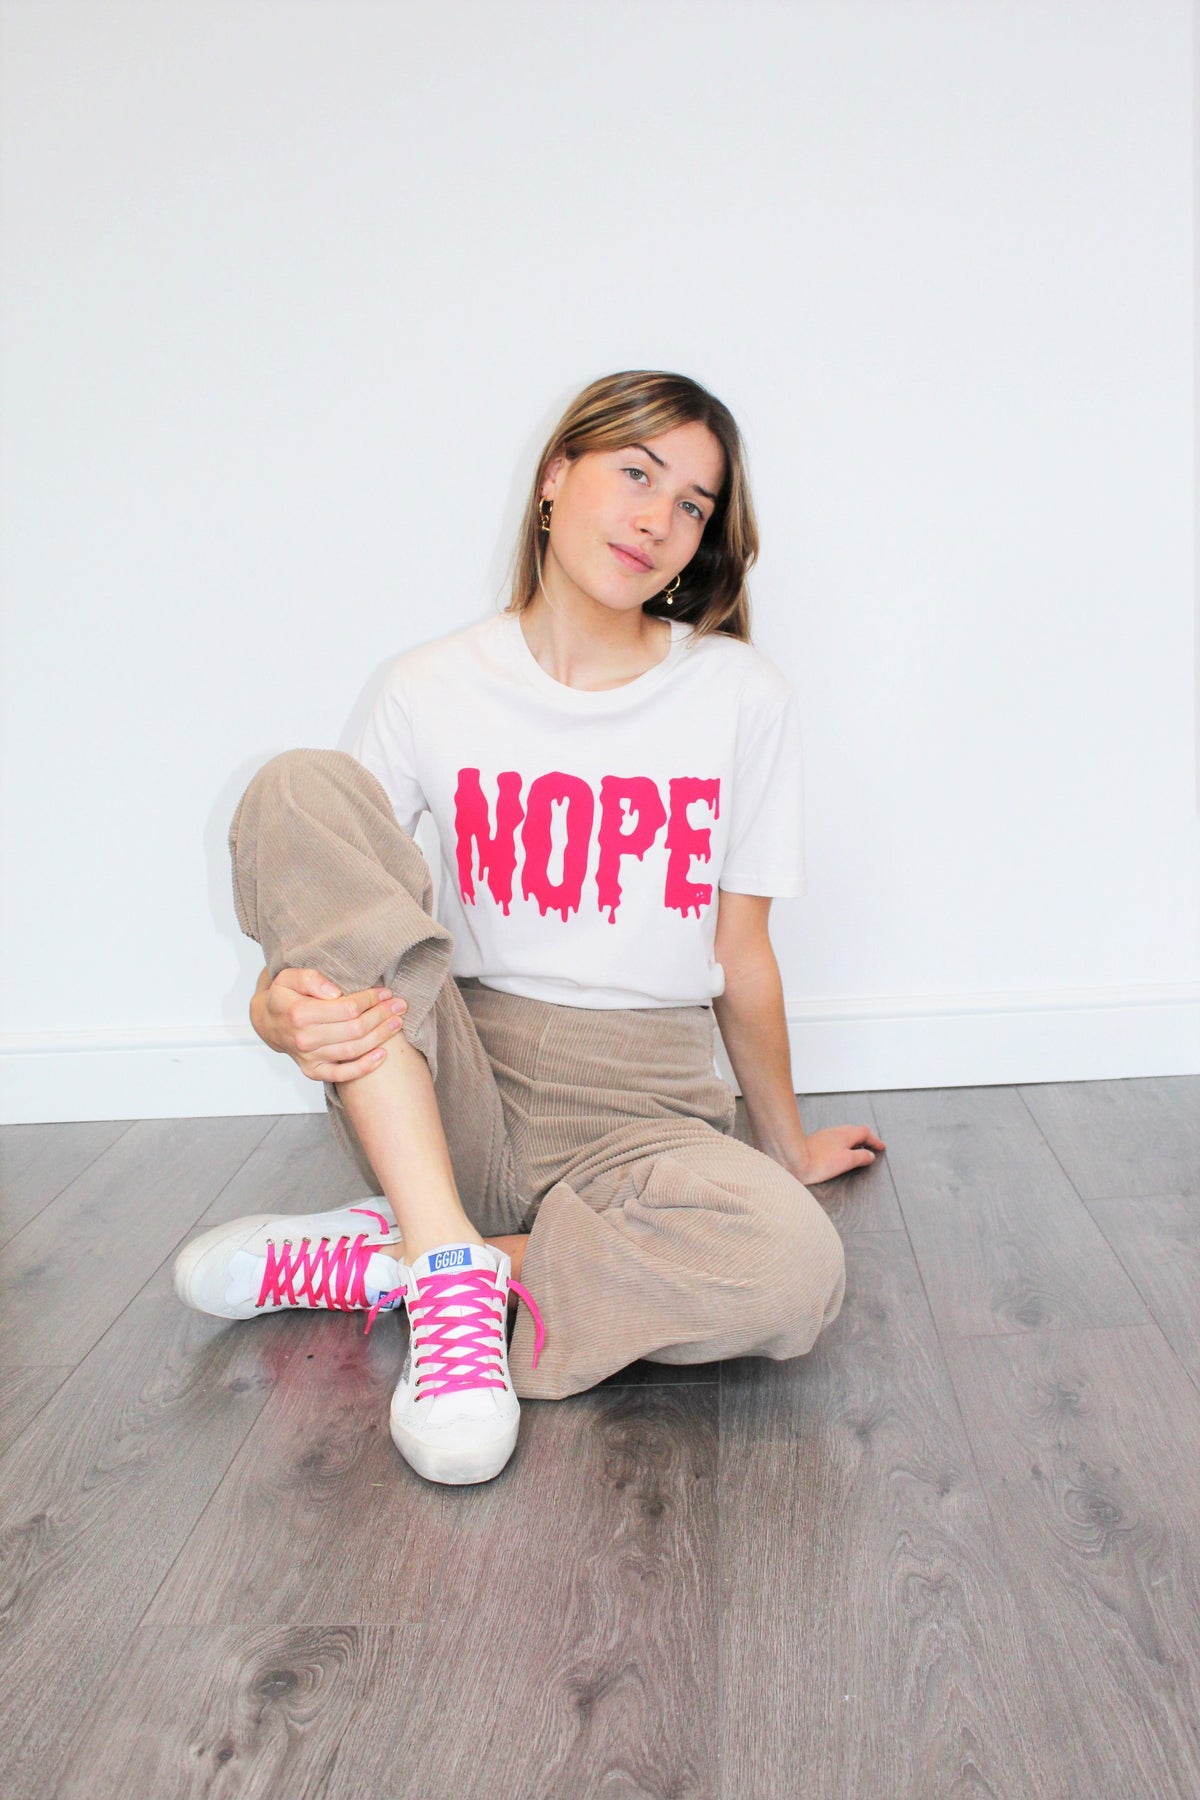 BS Nope Tee in Neon Pink and Vintage White